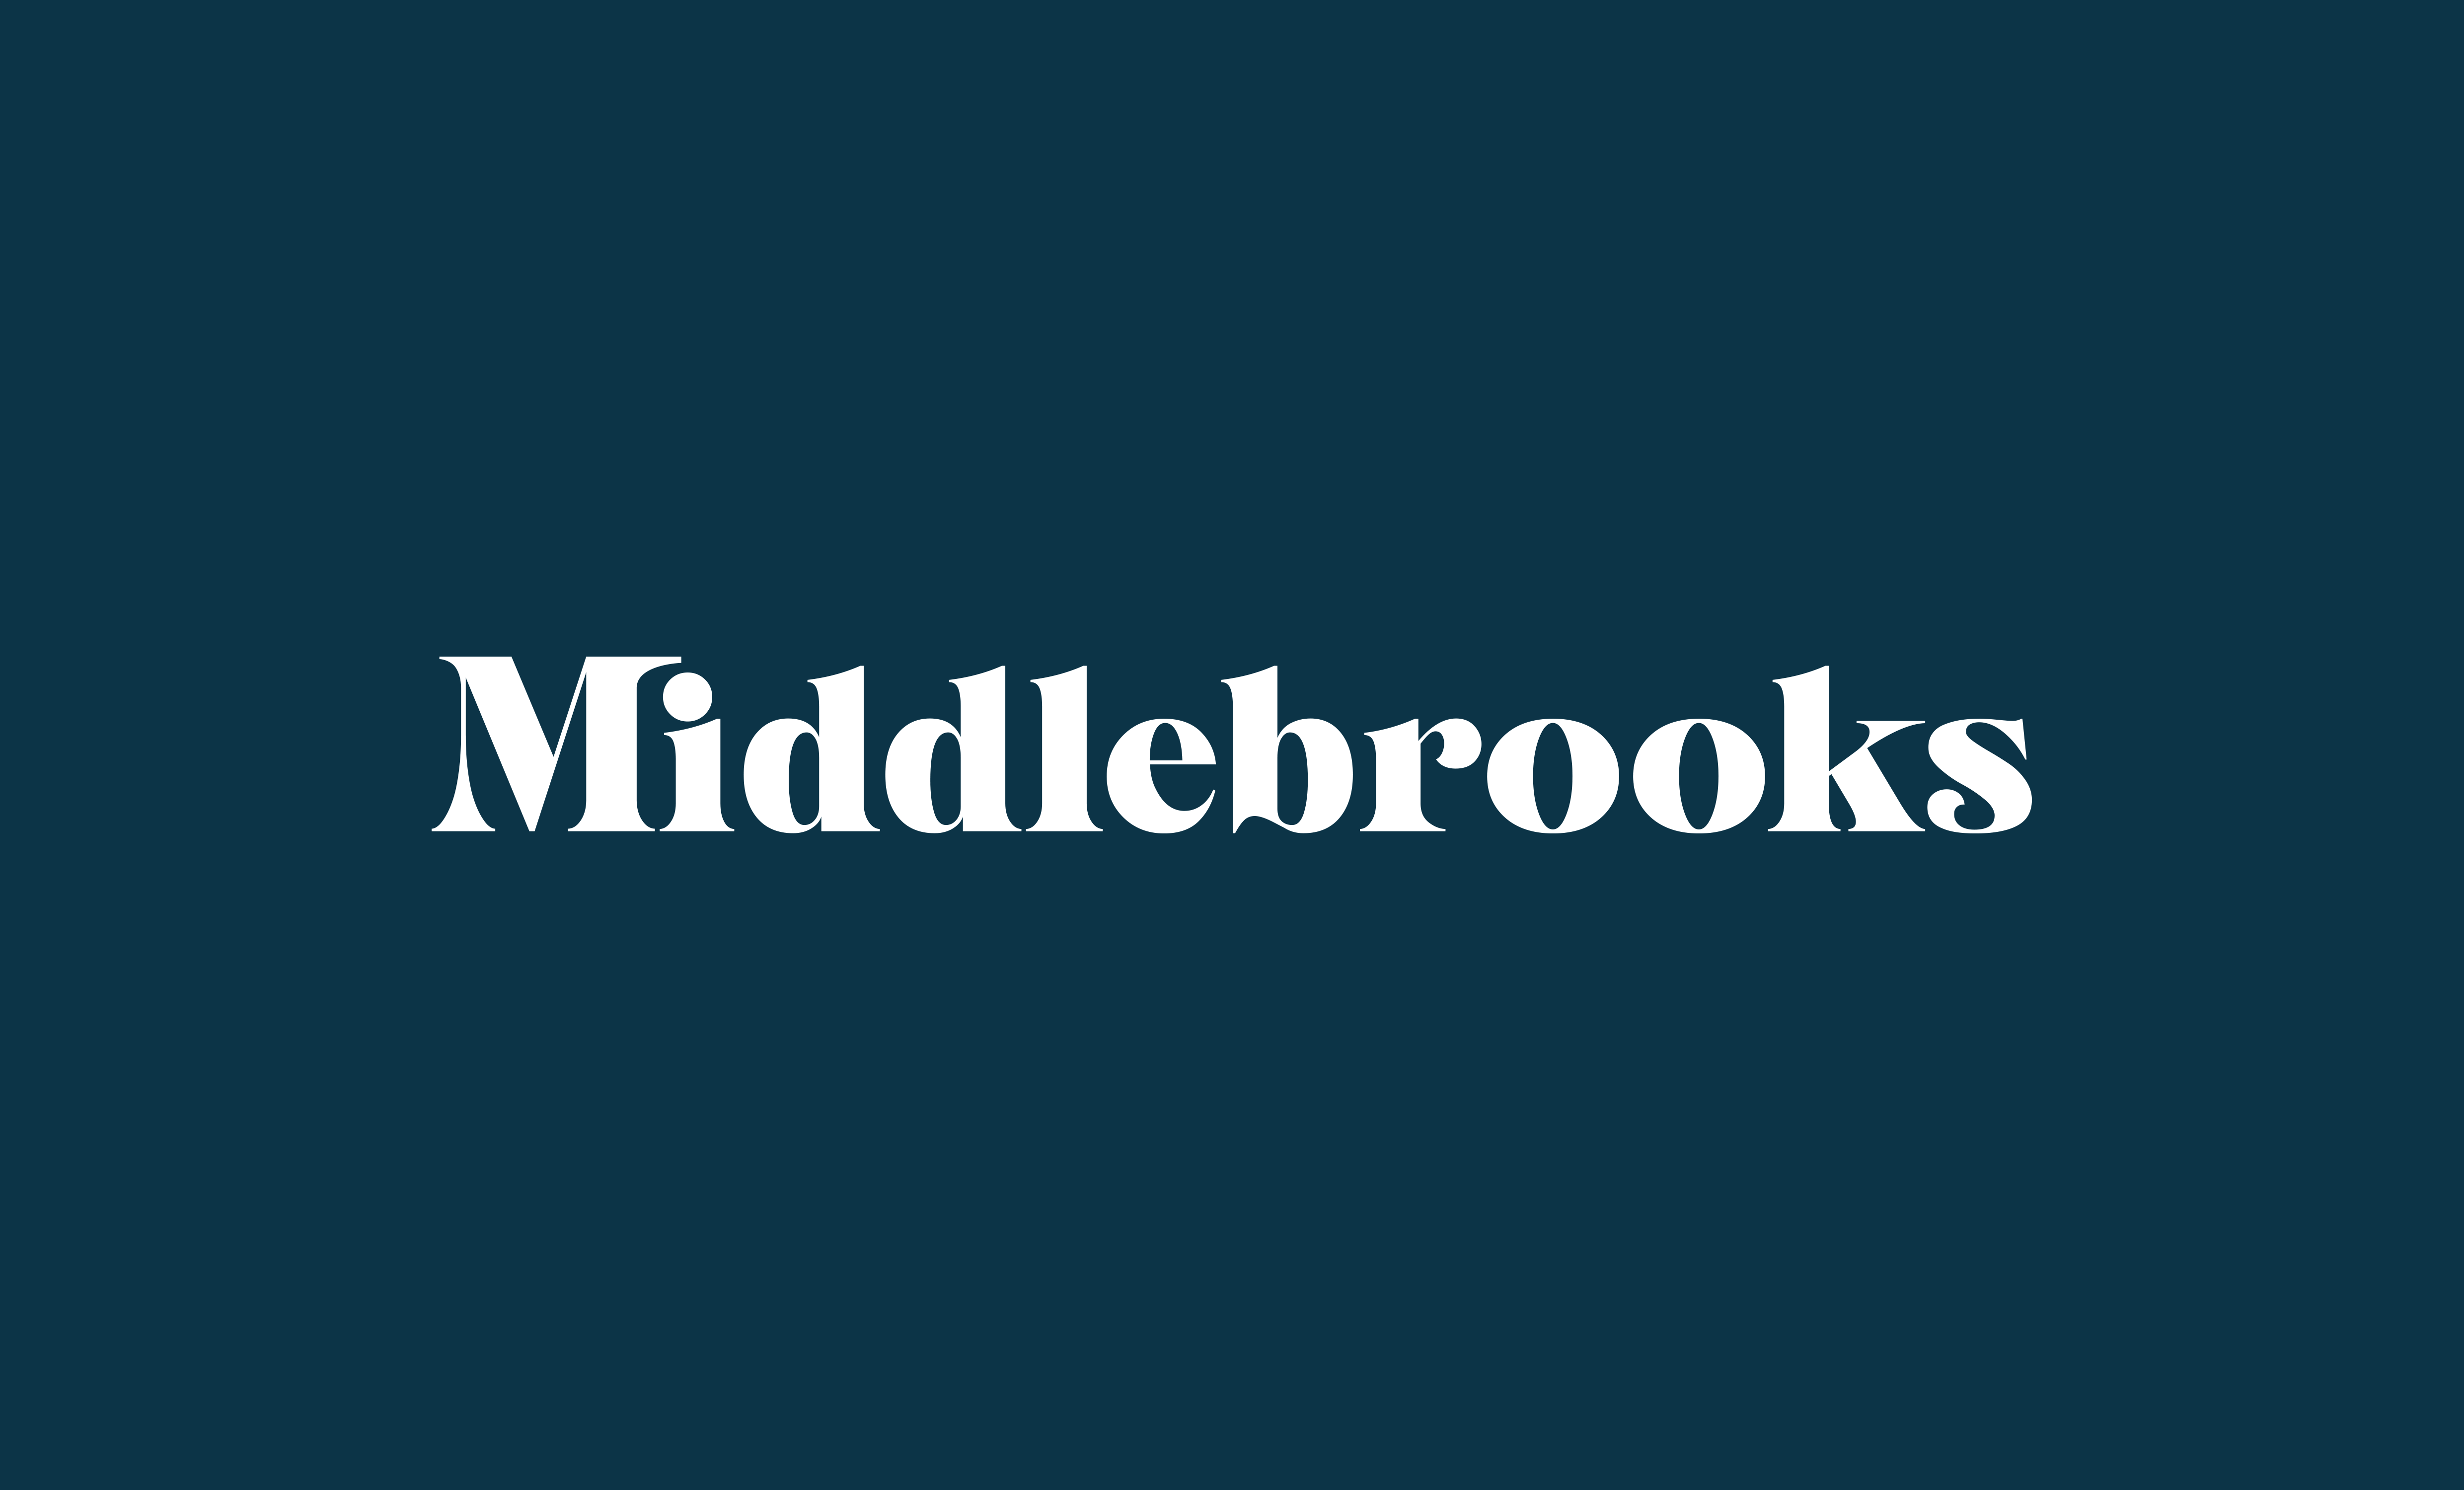 Middlebrooks helps clients become debt-free by becoming post-free